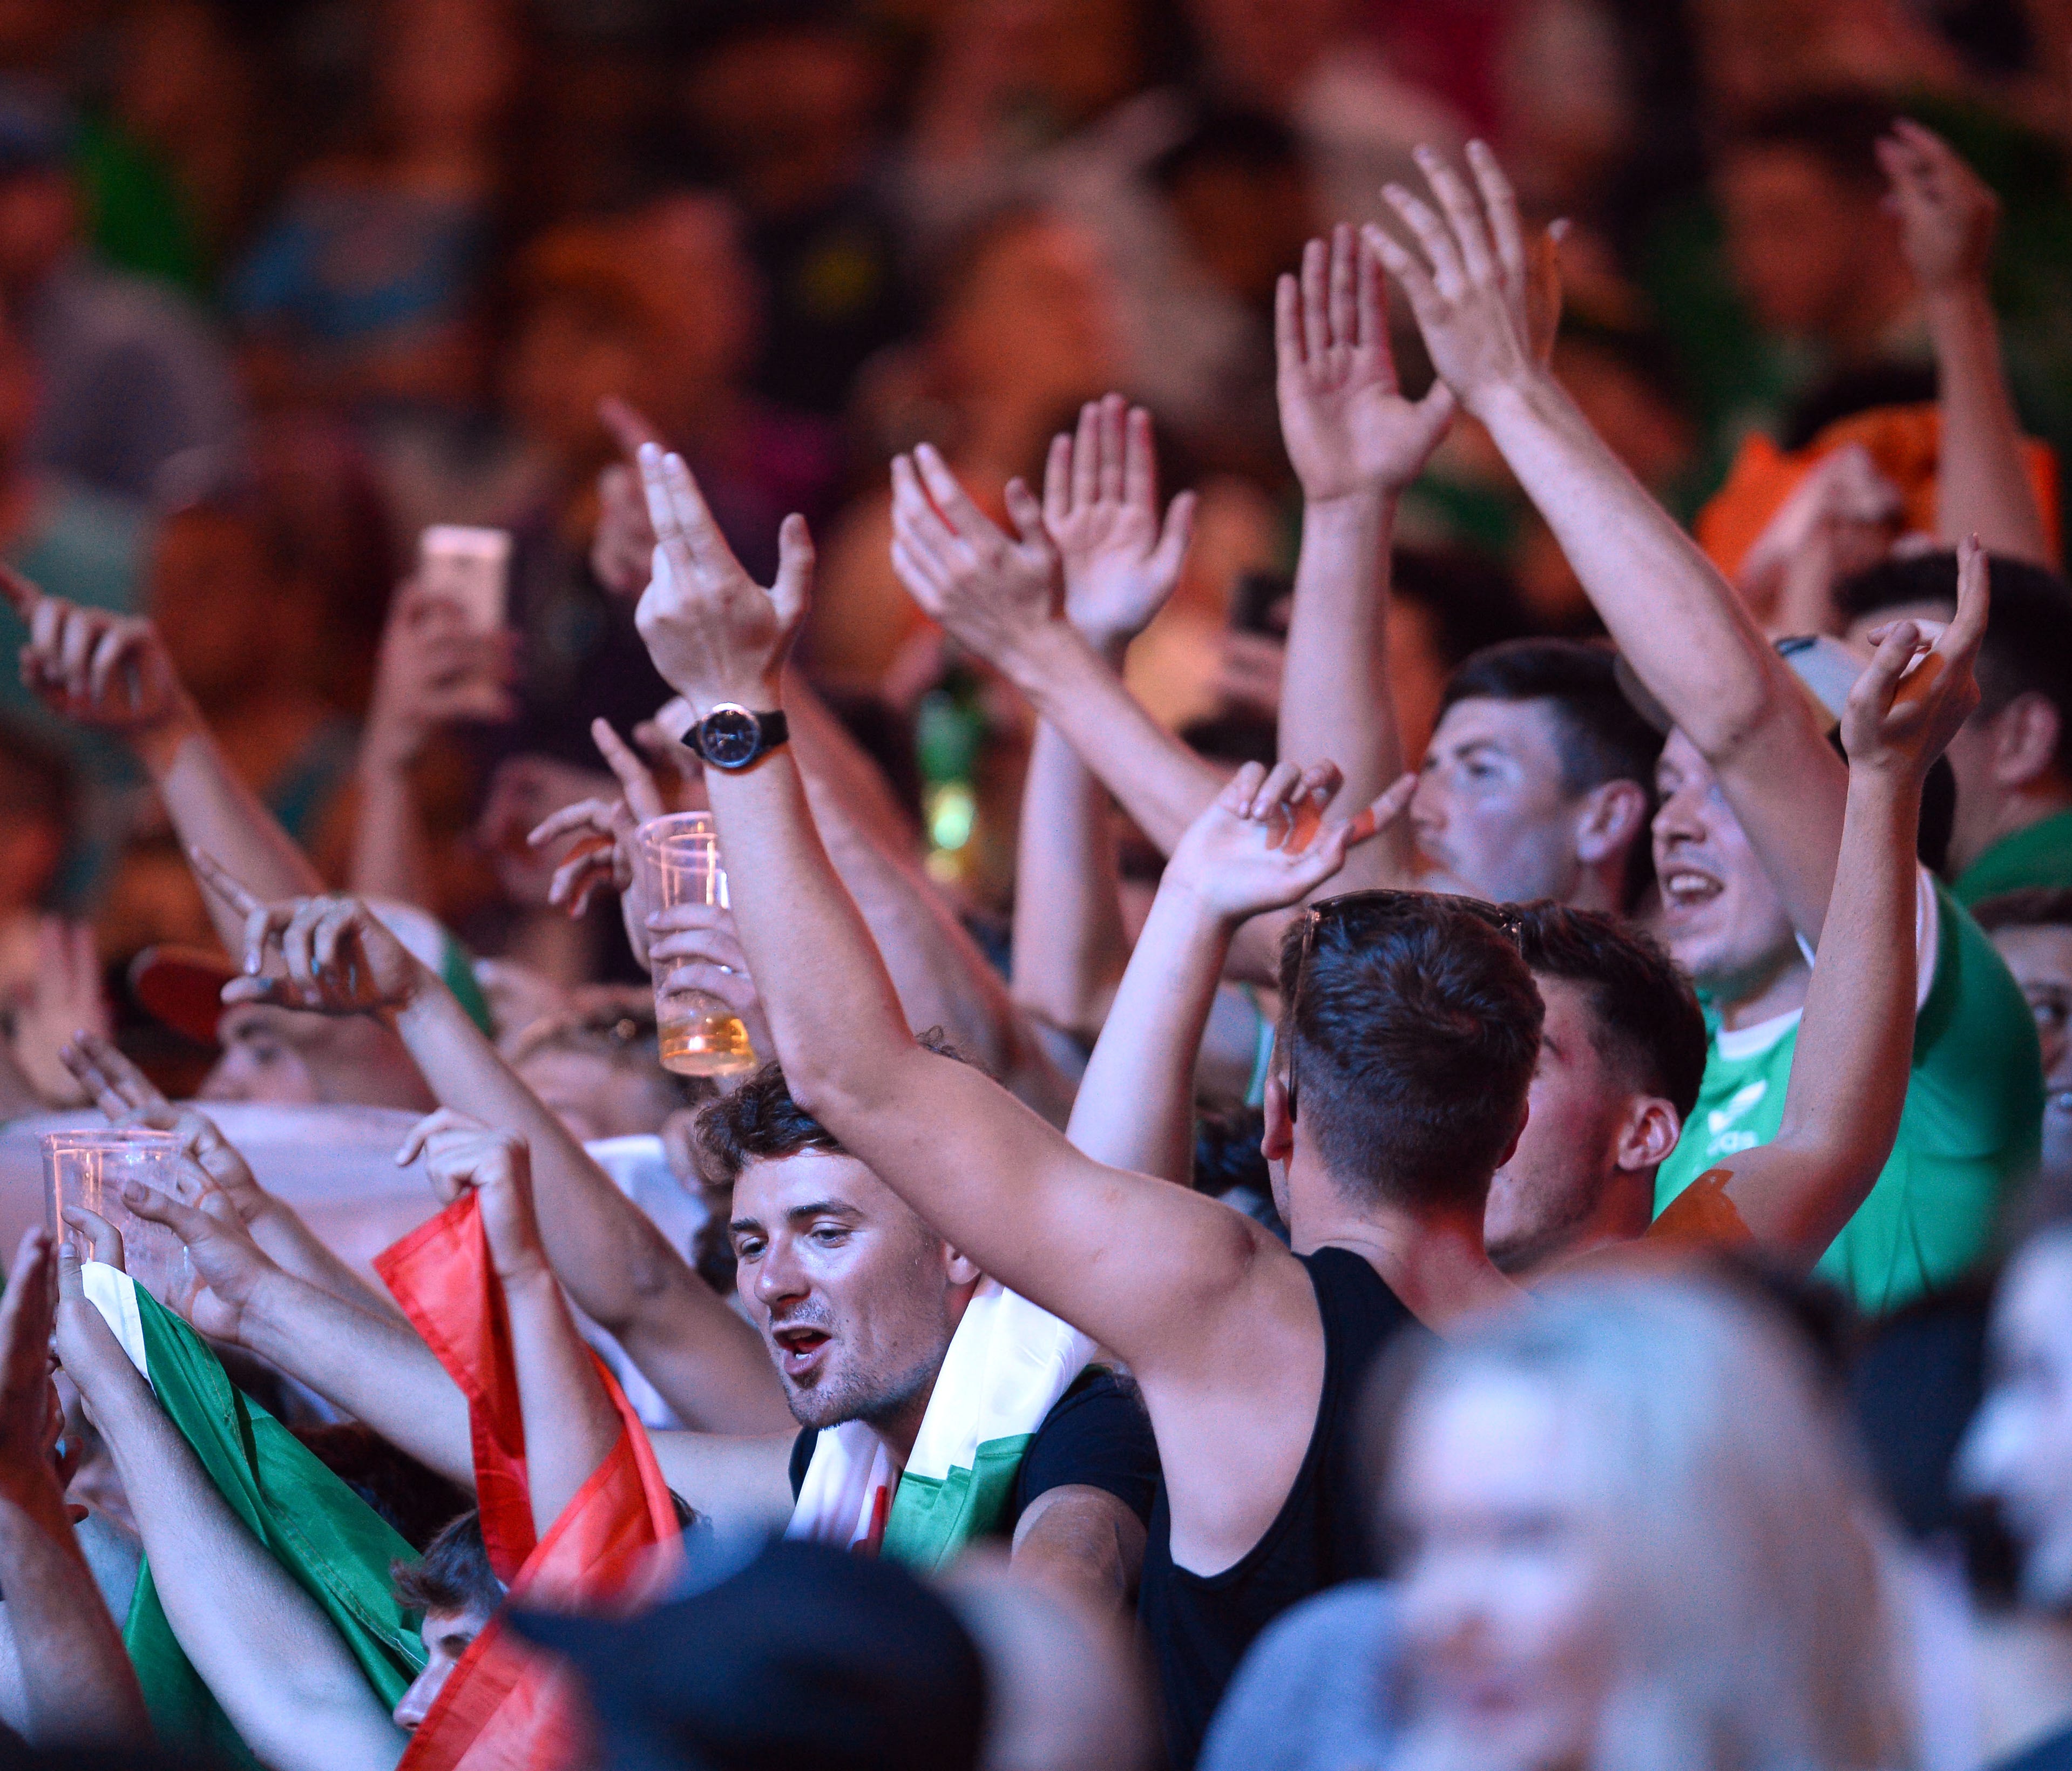 Fans cheer during weigh-ins for the upcoming boxing match between Floyd Mayweather Jr. and Conor McGregor.